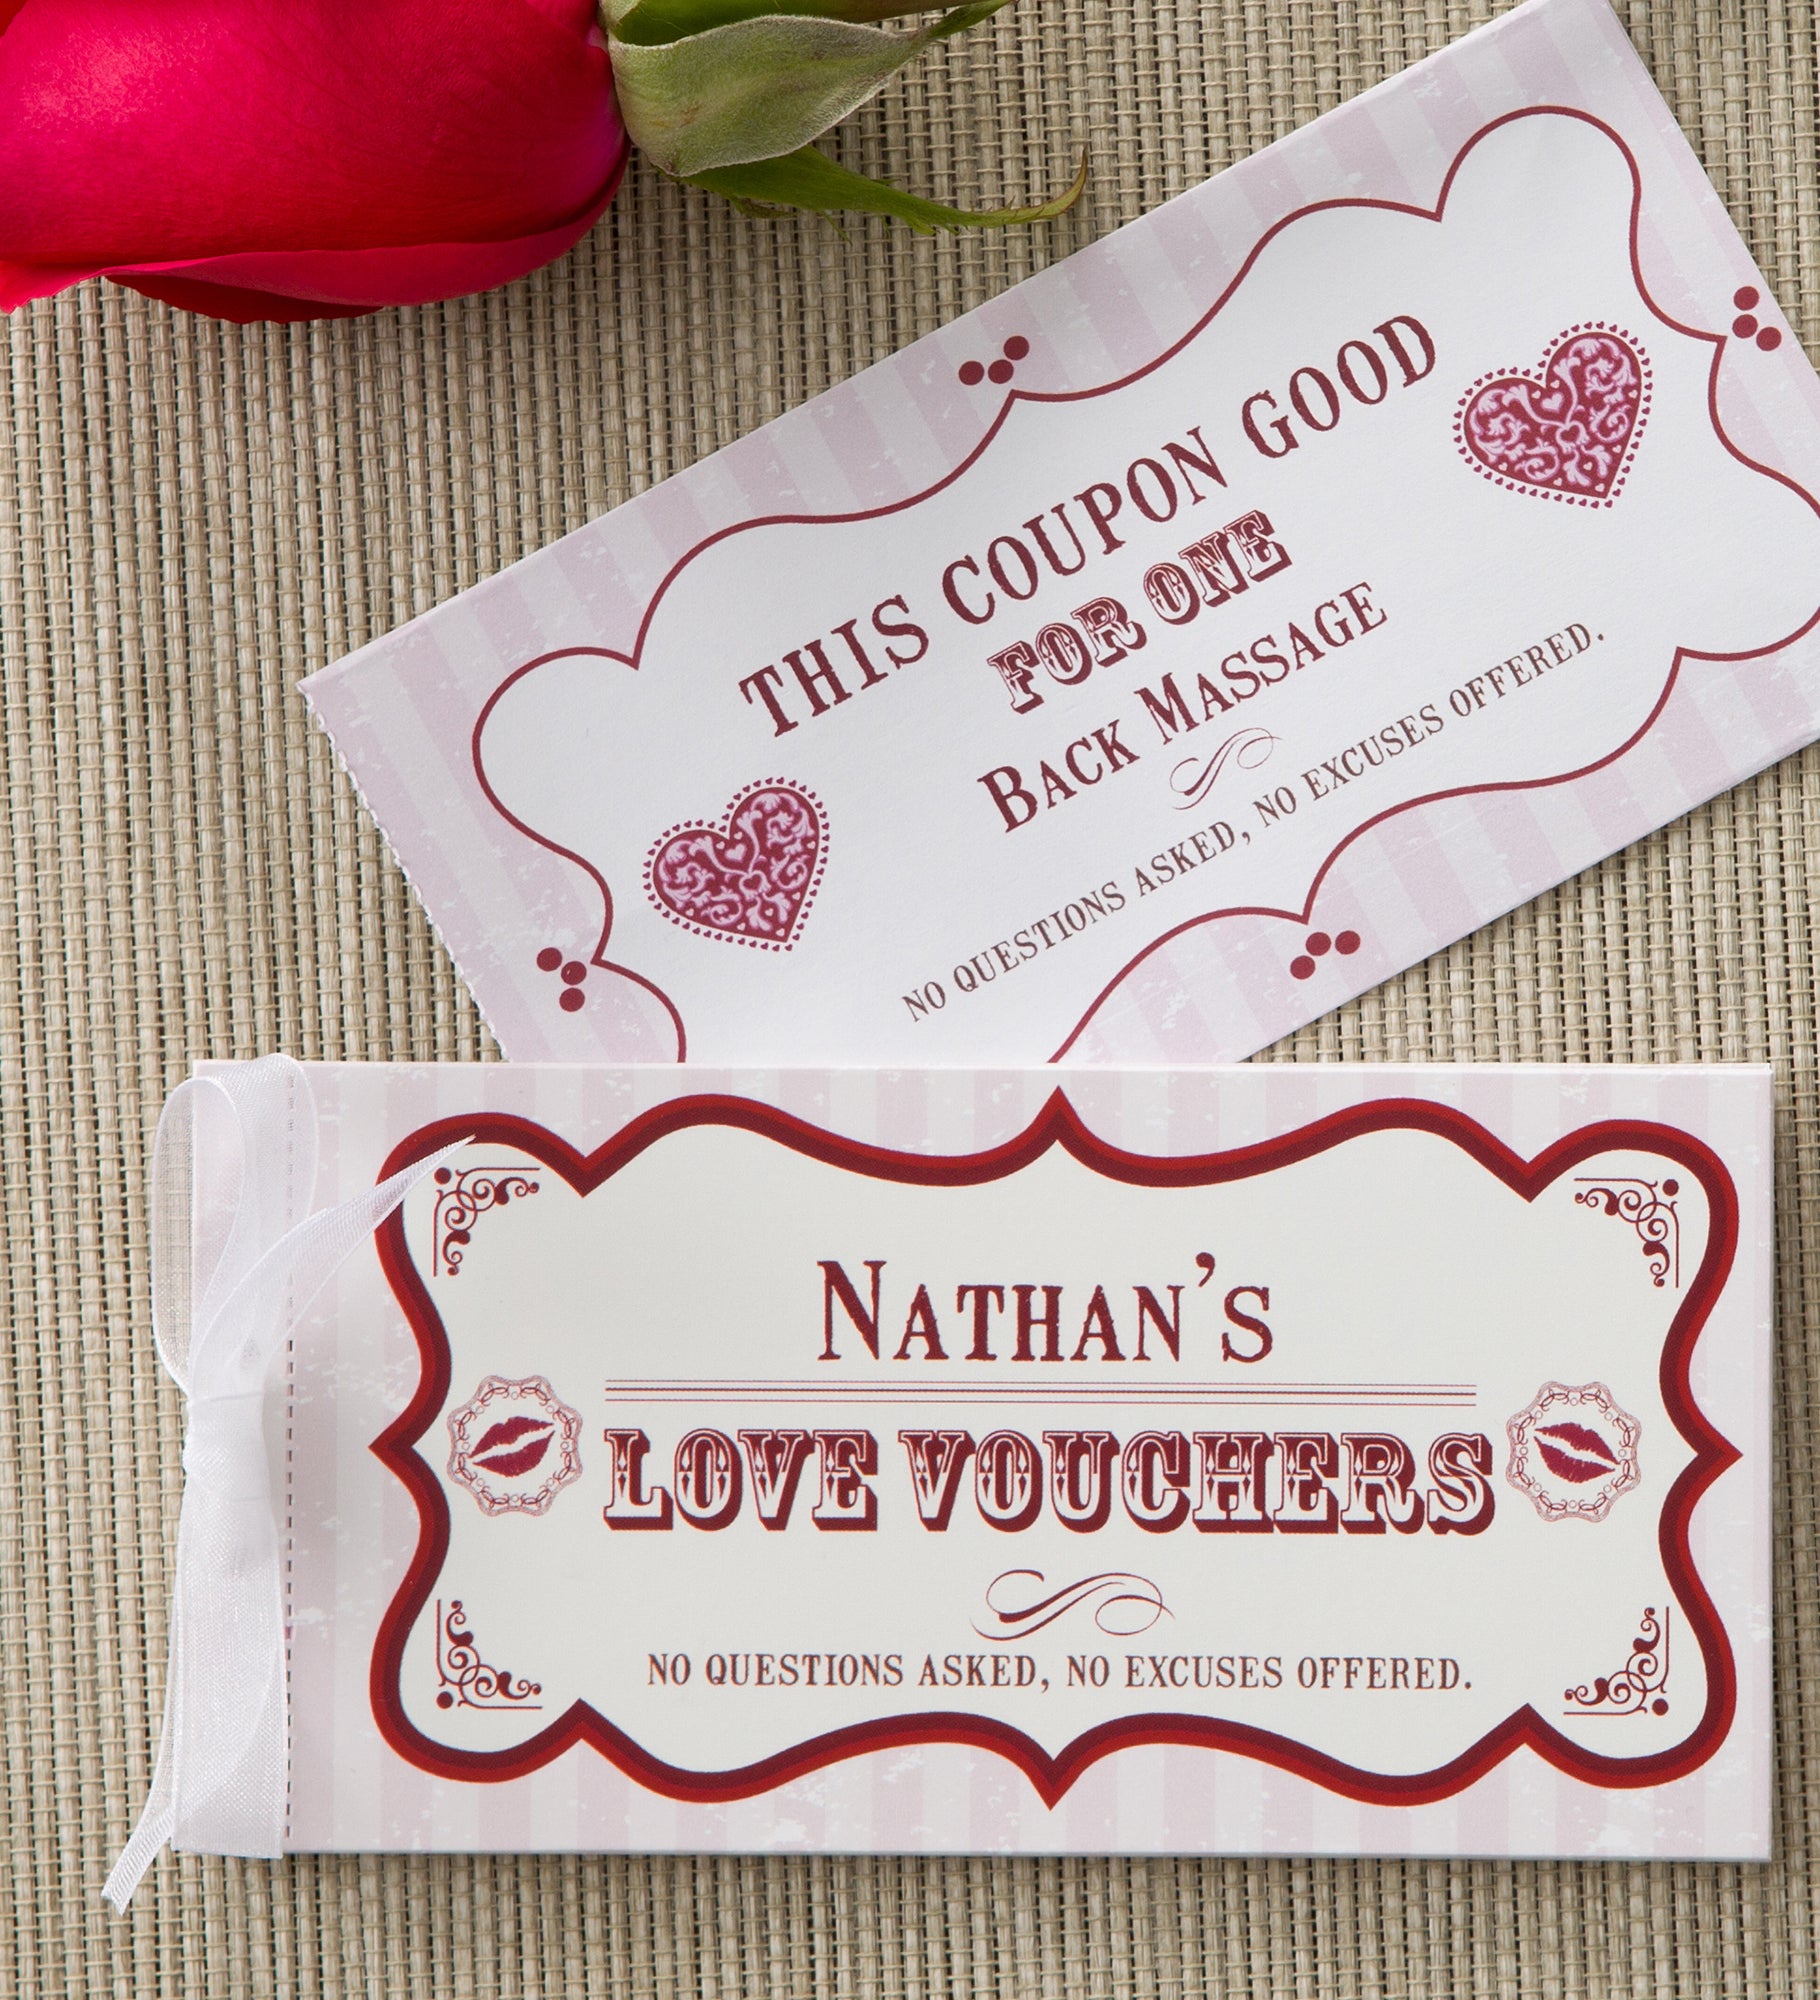 Create Your Own Personalized Vouchers Of Love